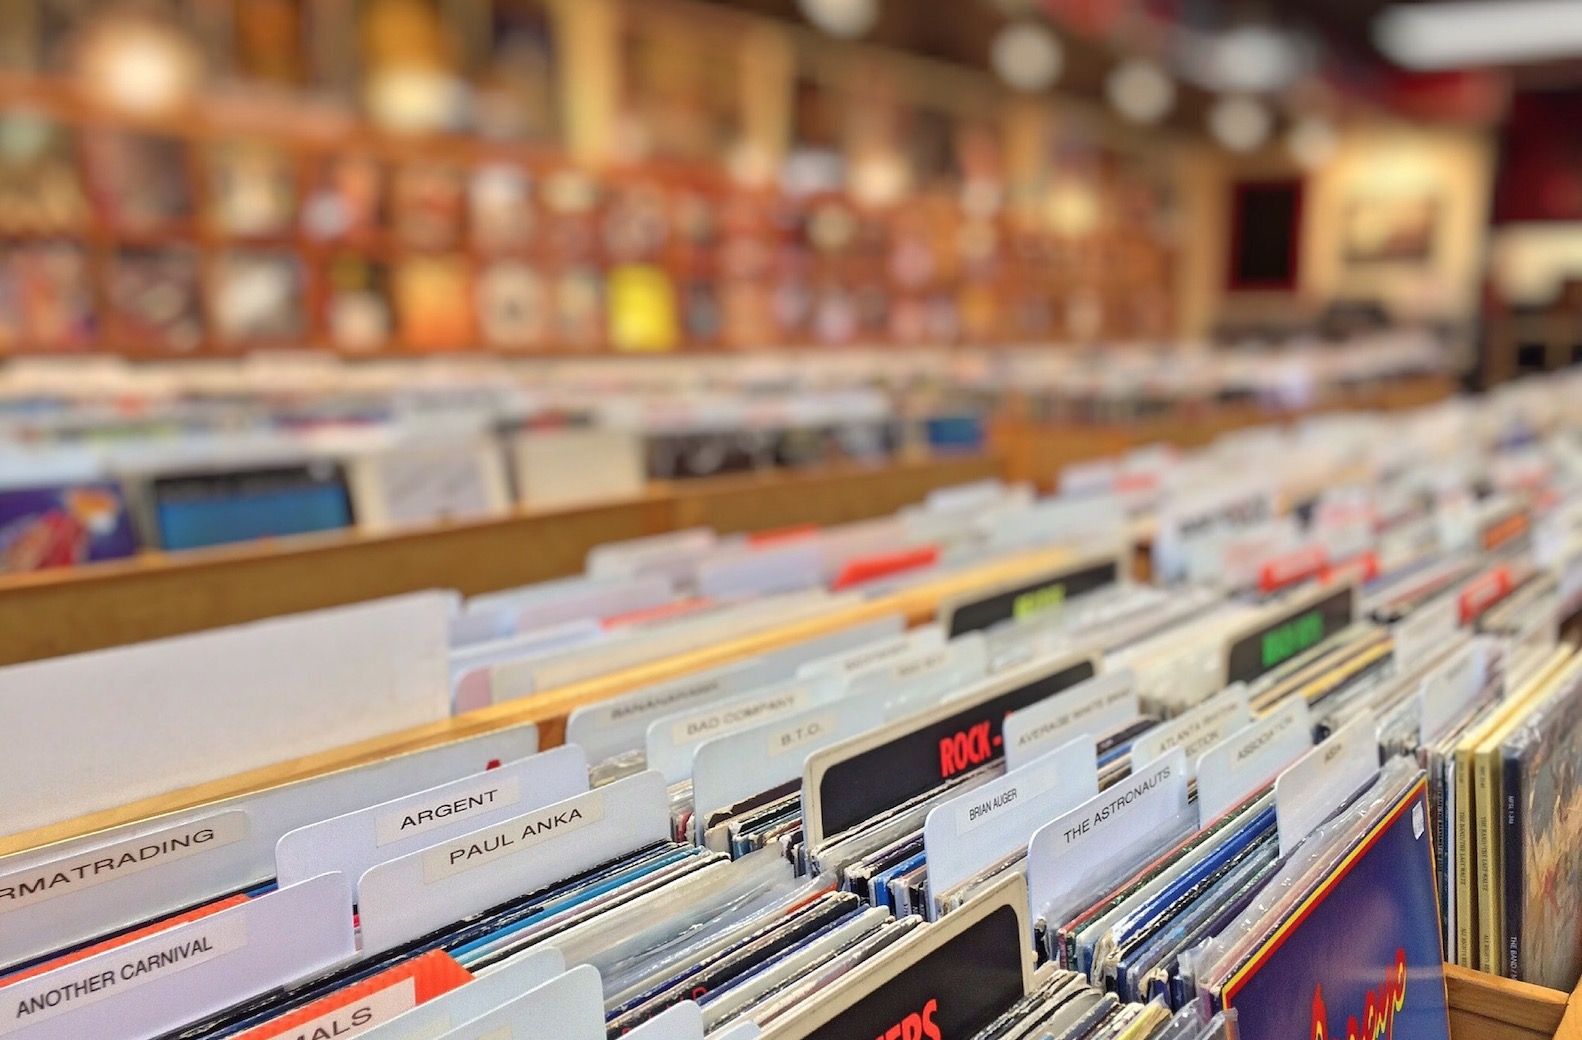 VINYL: IT HAS TO EARN THE RIGHT